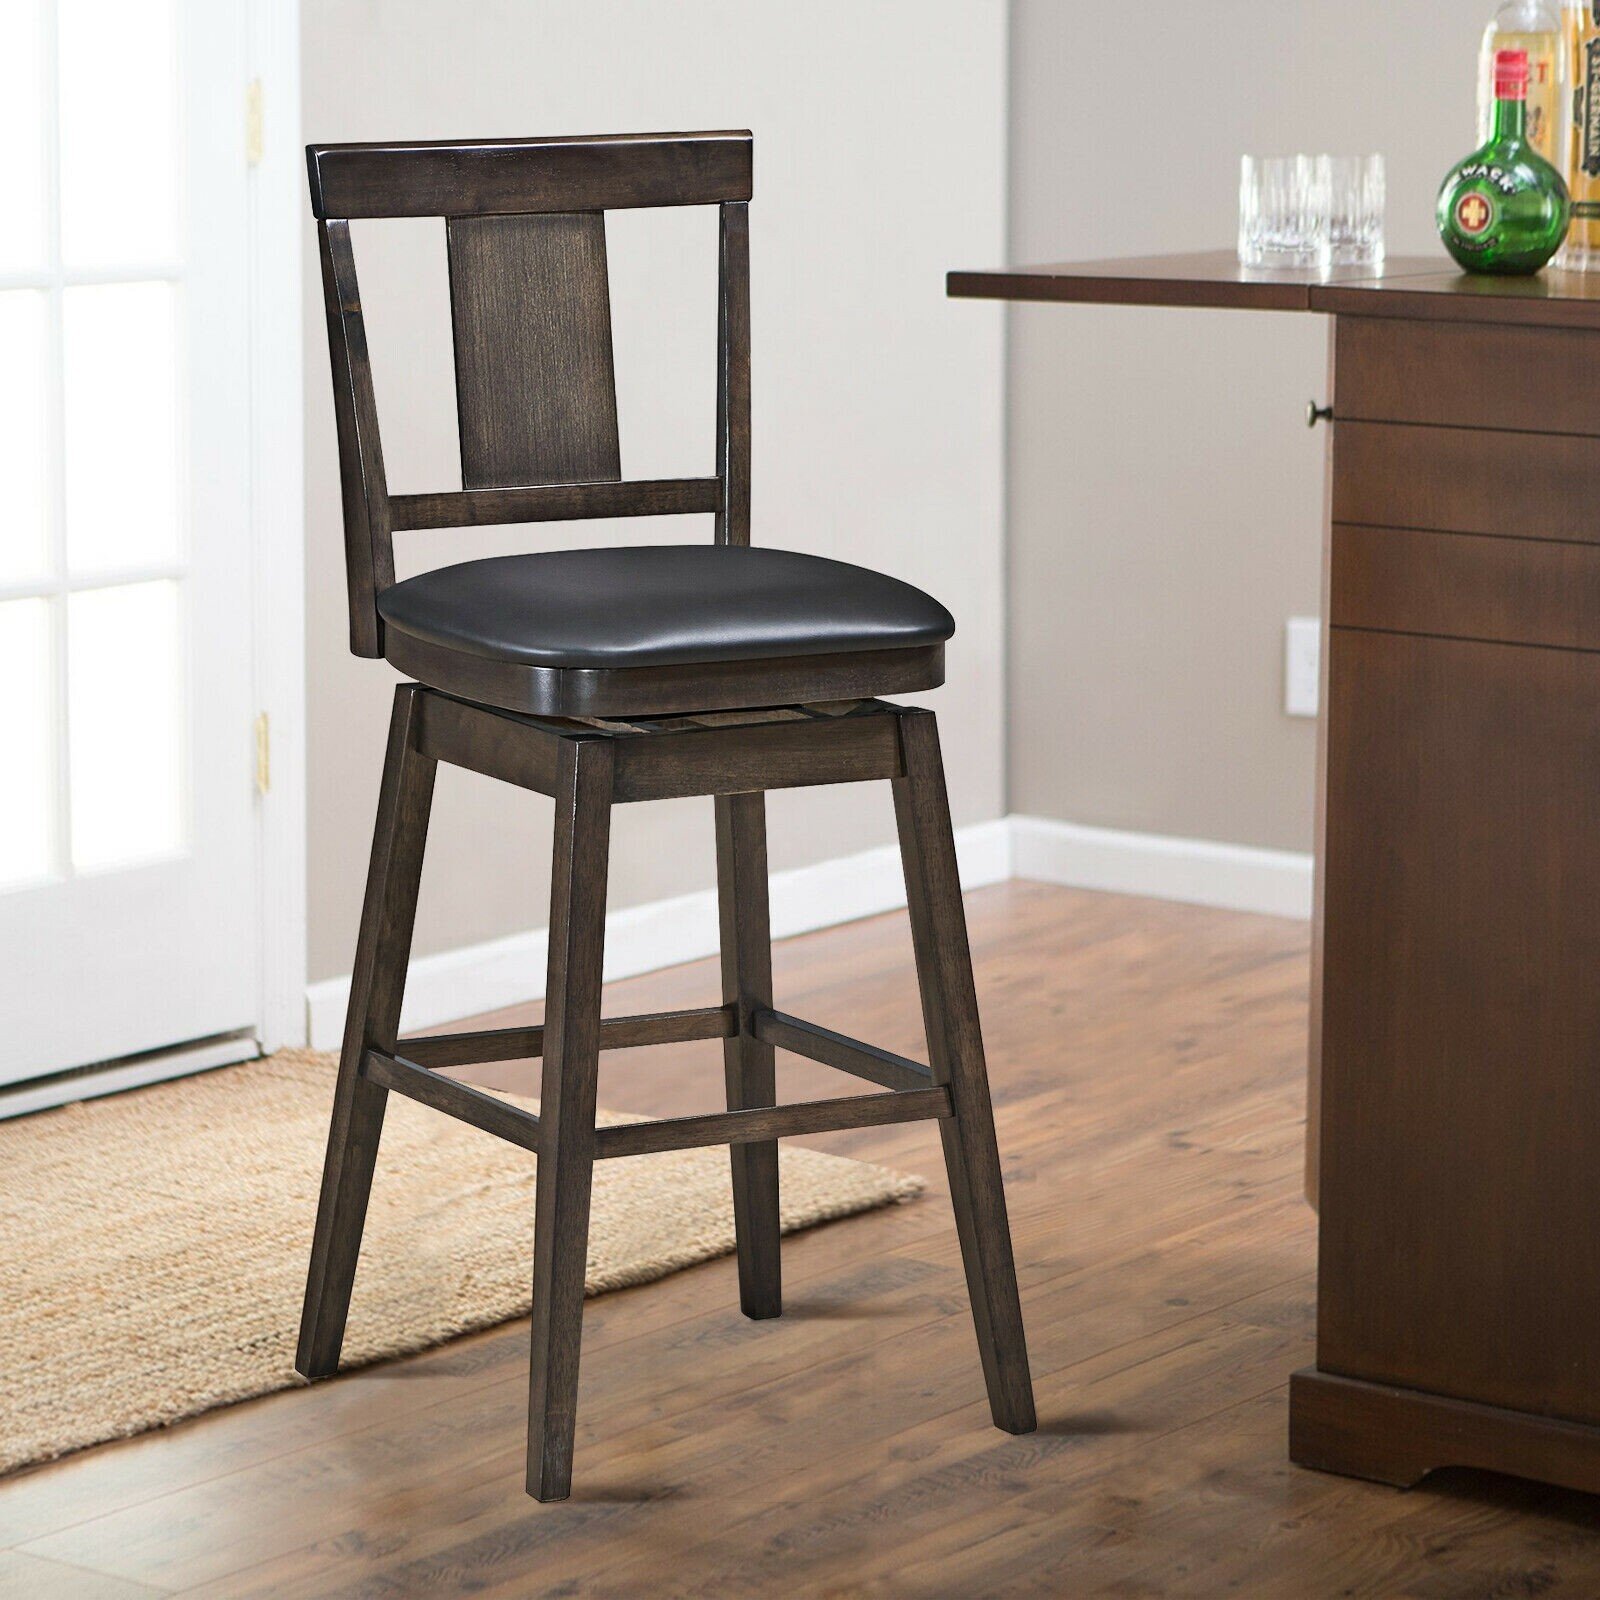 South 28 Seat Height Upholstered Bar Stool With Rubberwood Legs